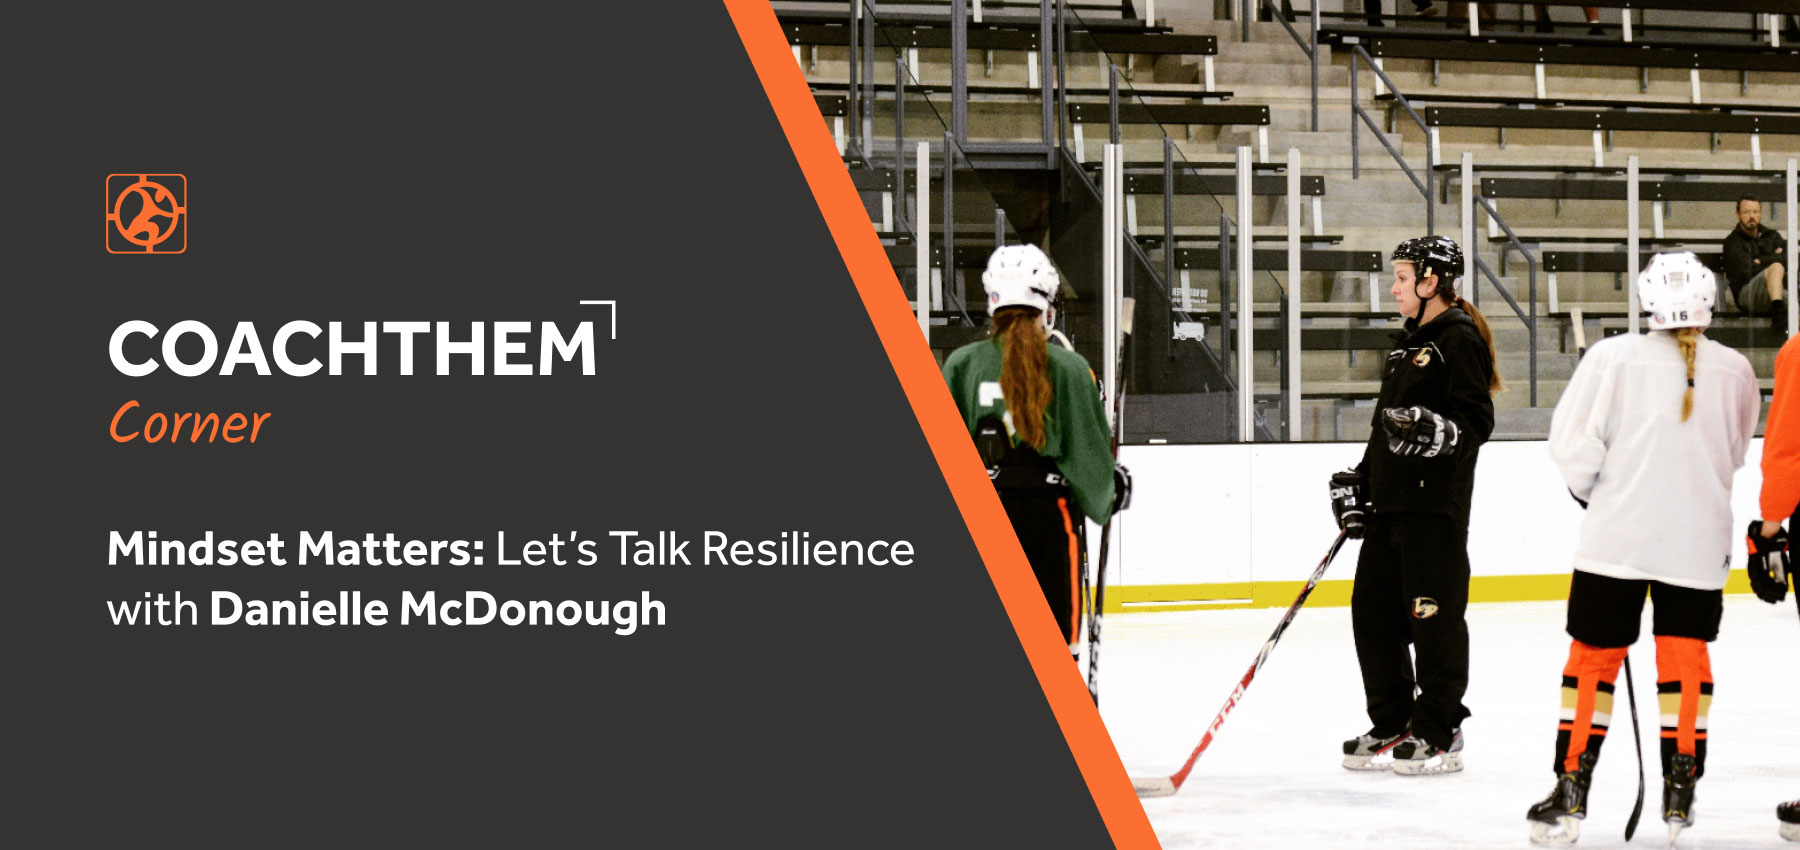 Mindset Matters: Let’s Talk Resilience  with Danielle McDonough